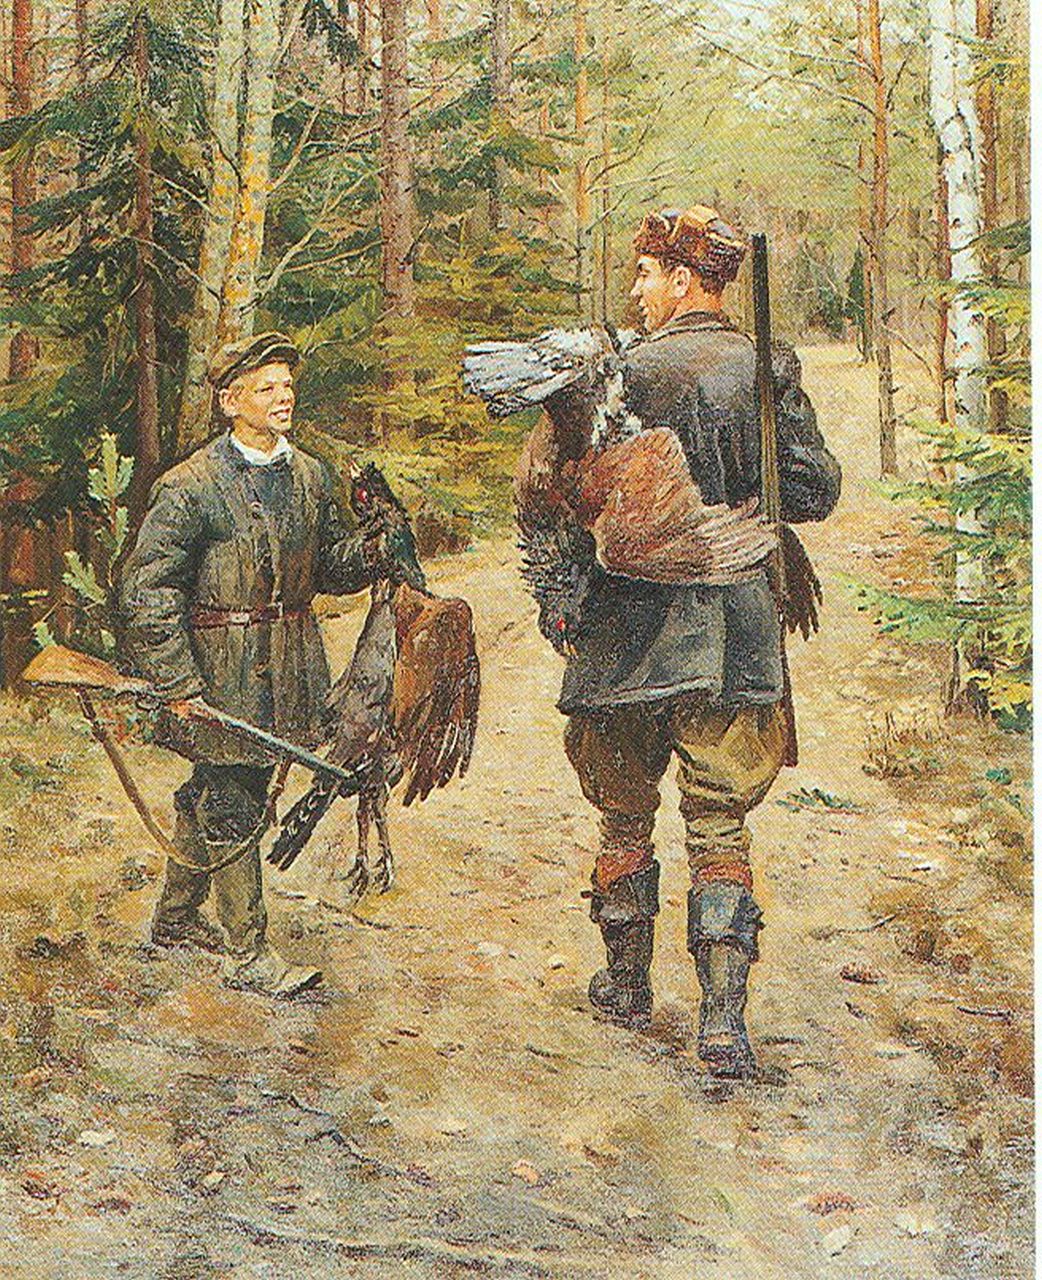 Sysoev N.A.  | Nikolay Aleksandrovitch Sysoev, Hunters in a forest, Öl auf Leinwand 124,0 x 100,0 cm, signed on the reverse und dated 1955